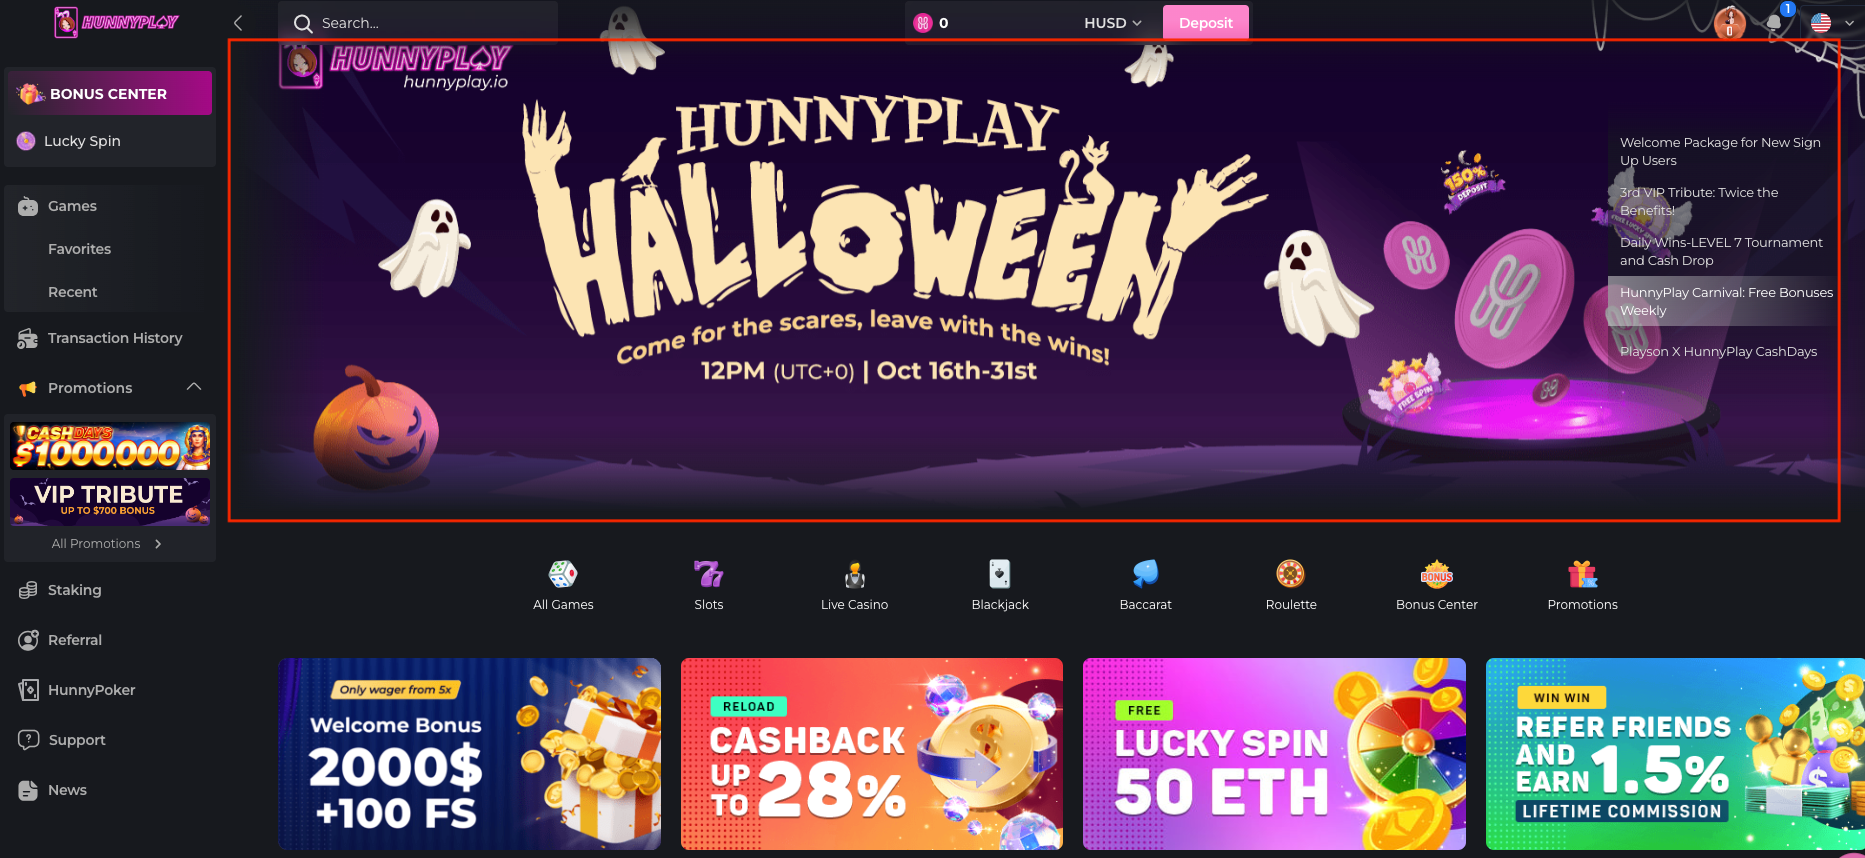 HunnyPlay Halloween - Come For The Scare, Leave With The Wins